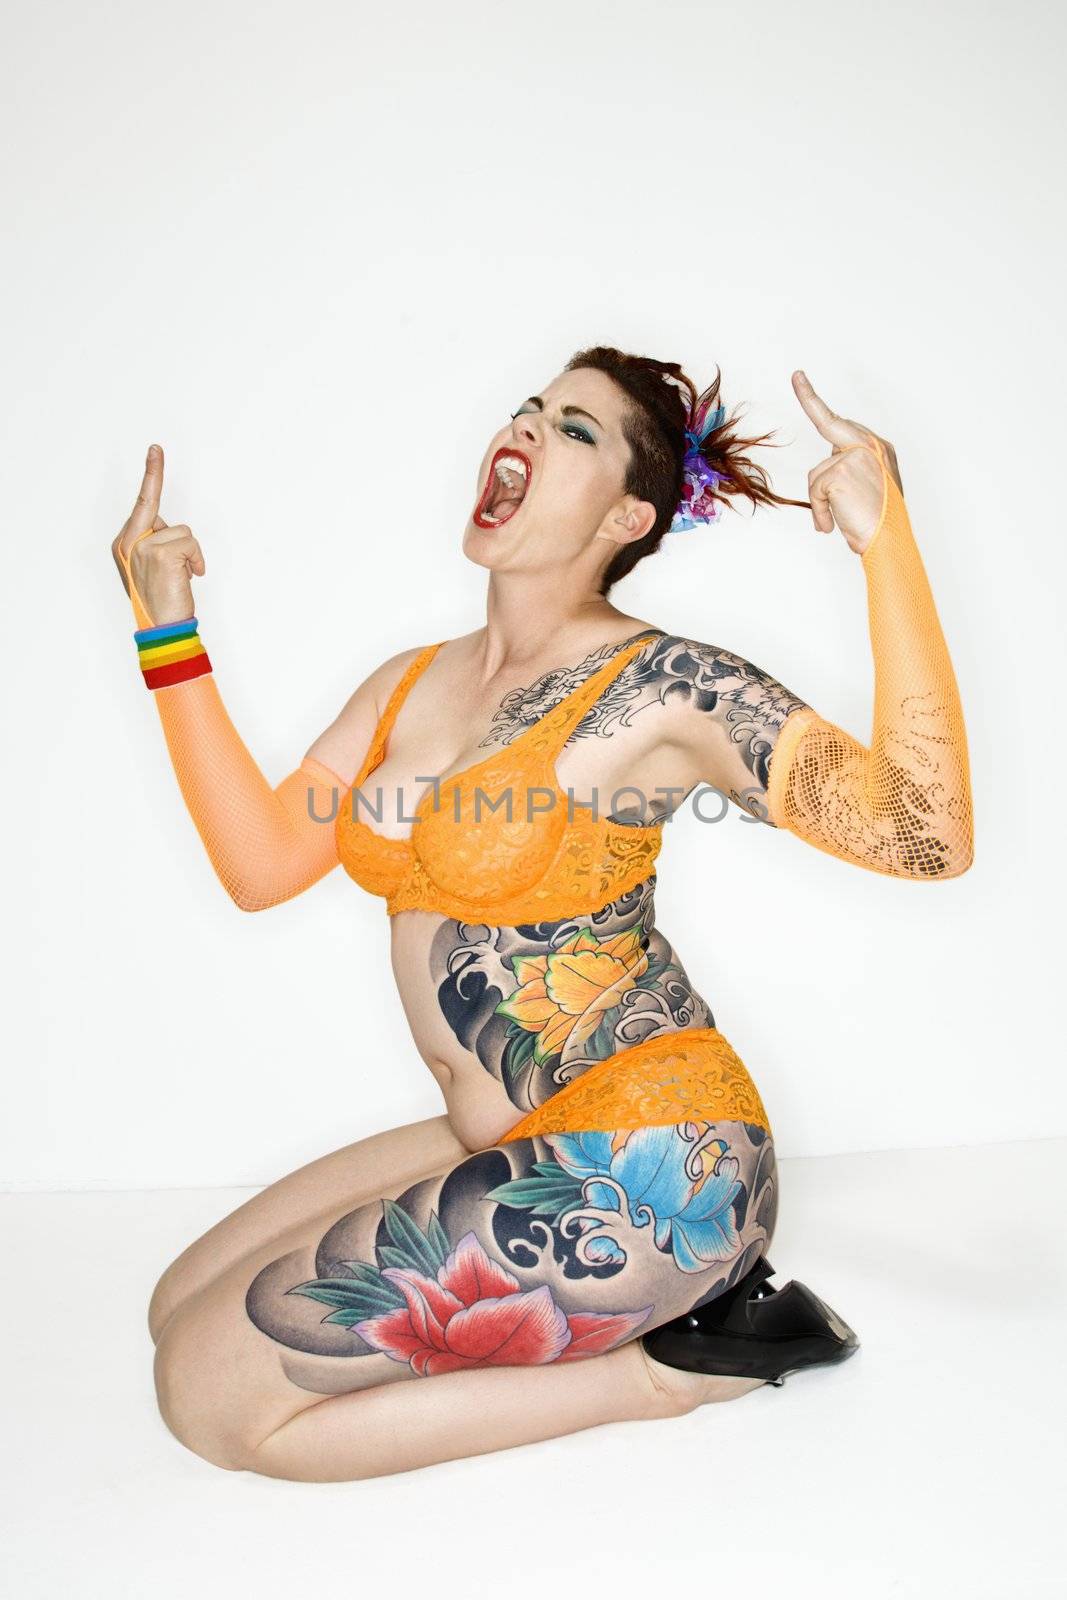 Adult caucasian woman with tattoos making obscene gesture.